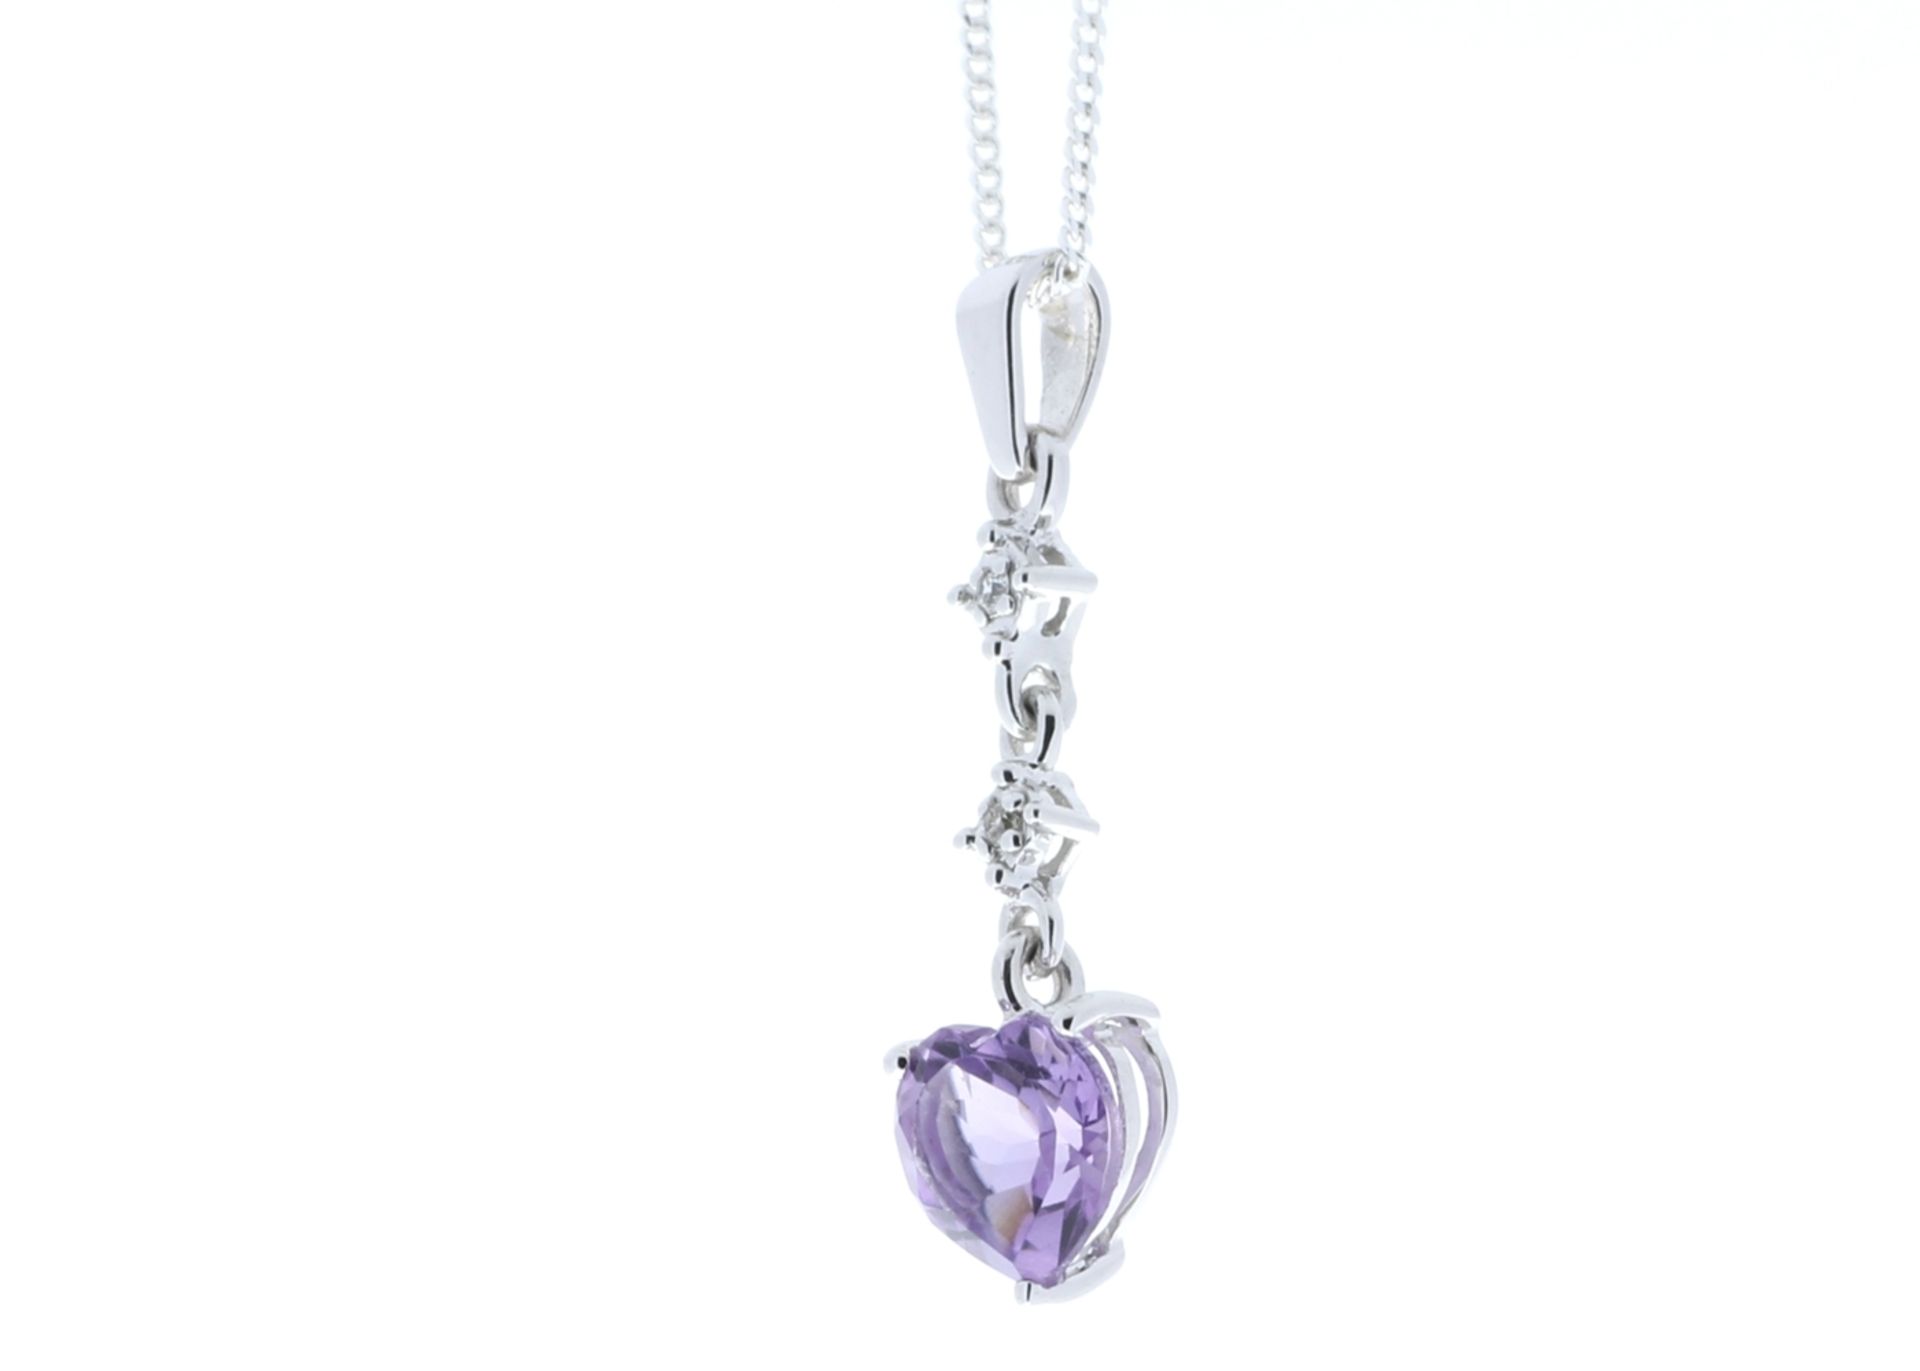 9ct White Gold Amethyst Heart Shape Diamond Pendant 0.01 Carats - Valued by GIE £420.00 - This - Image 3 of 5